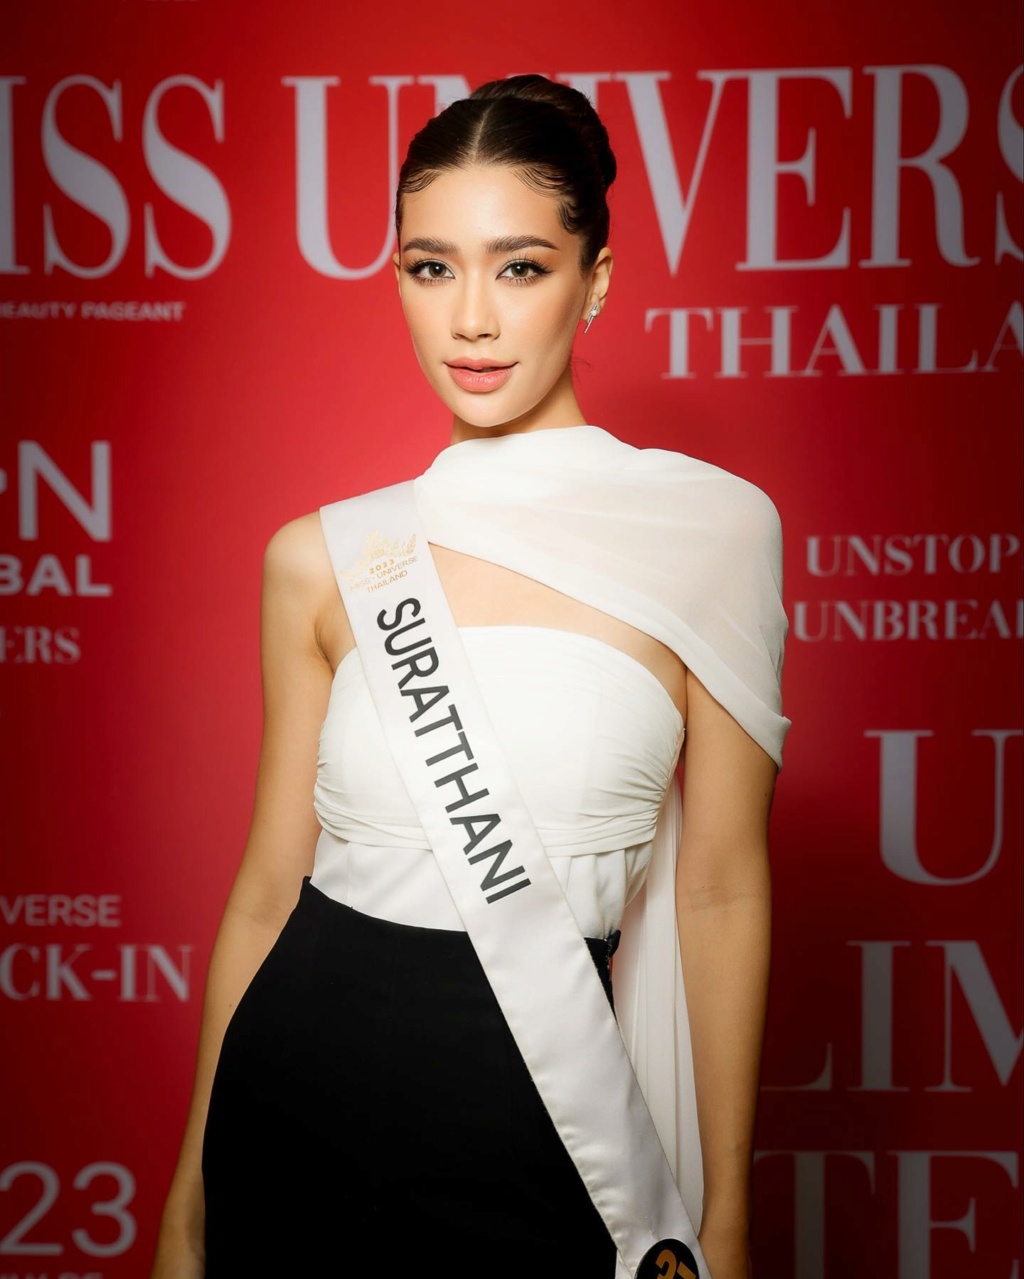 Road to MISS UNIVERSE THAILAND 2023 - Page 6 Ins11350